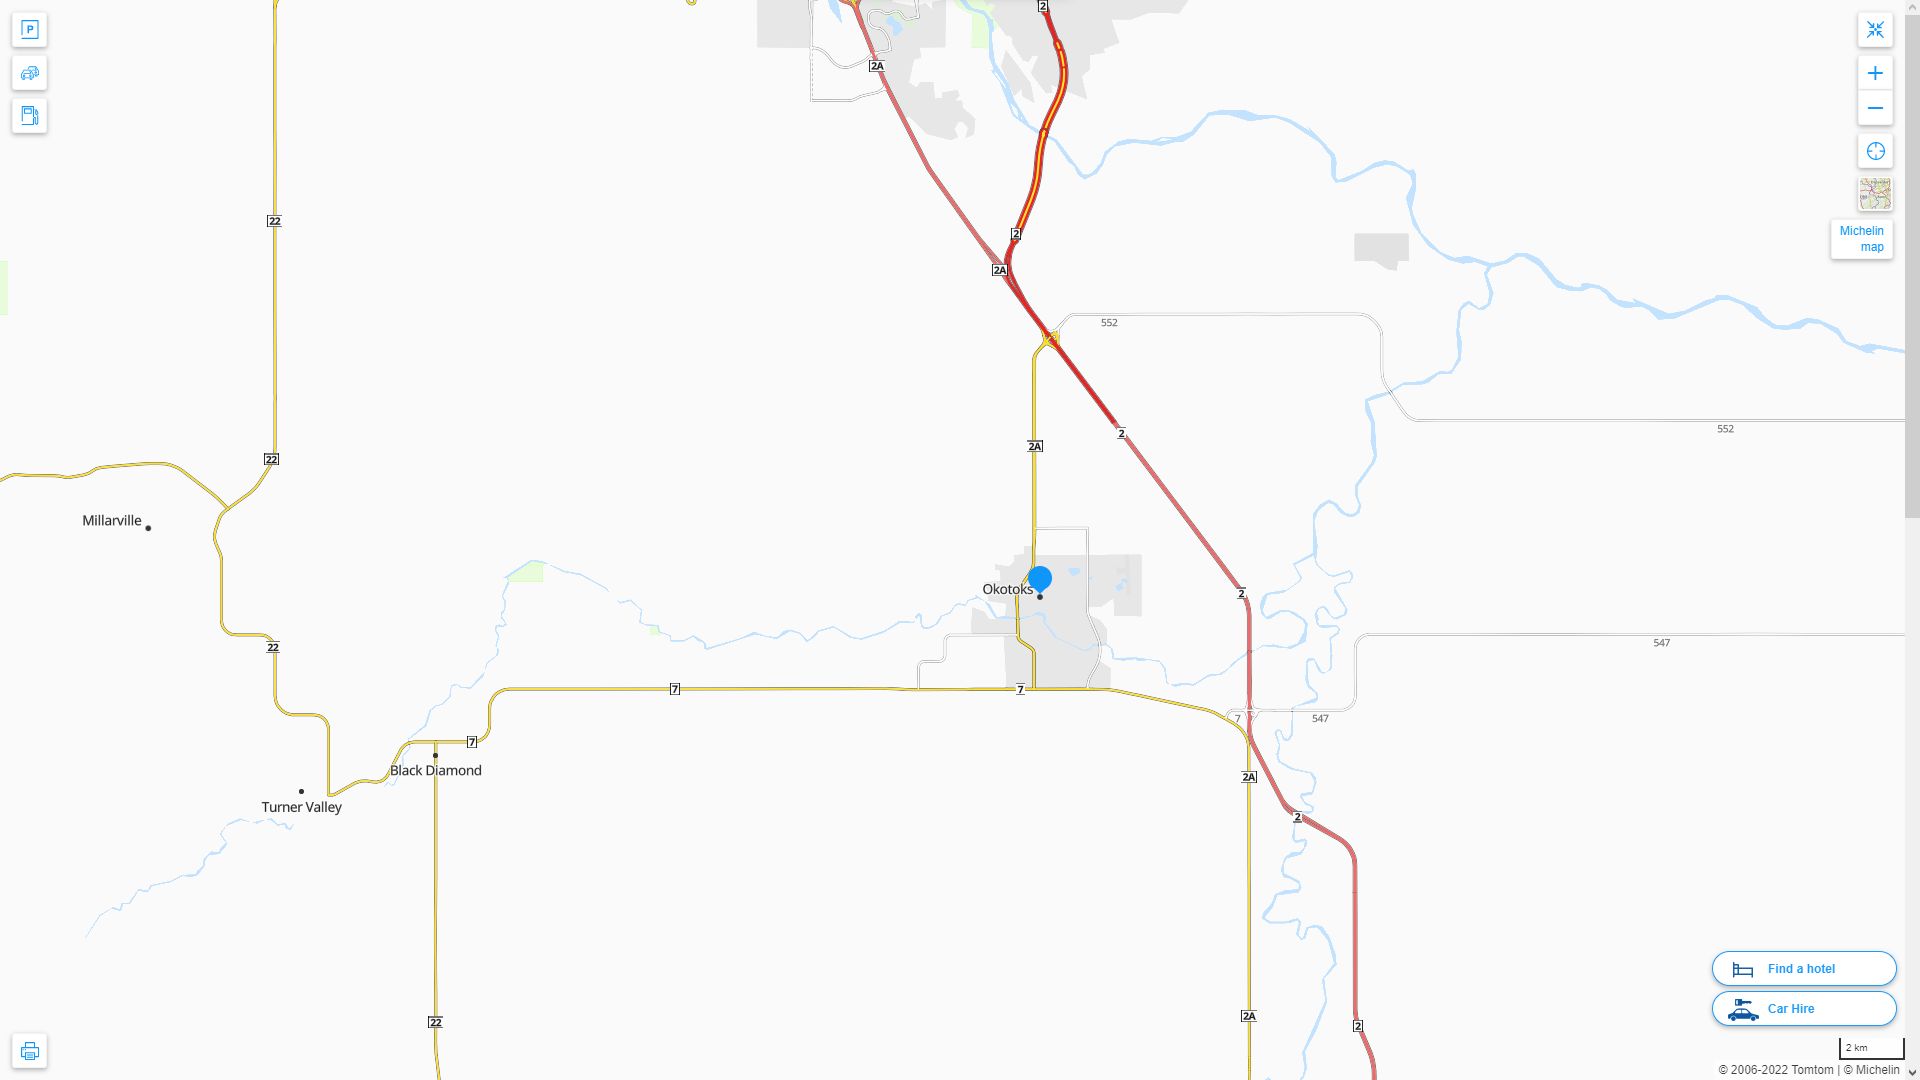 Okotoks Highway and Road Map